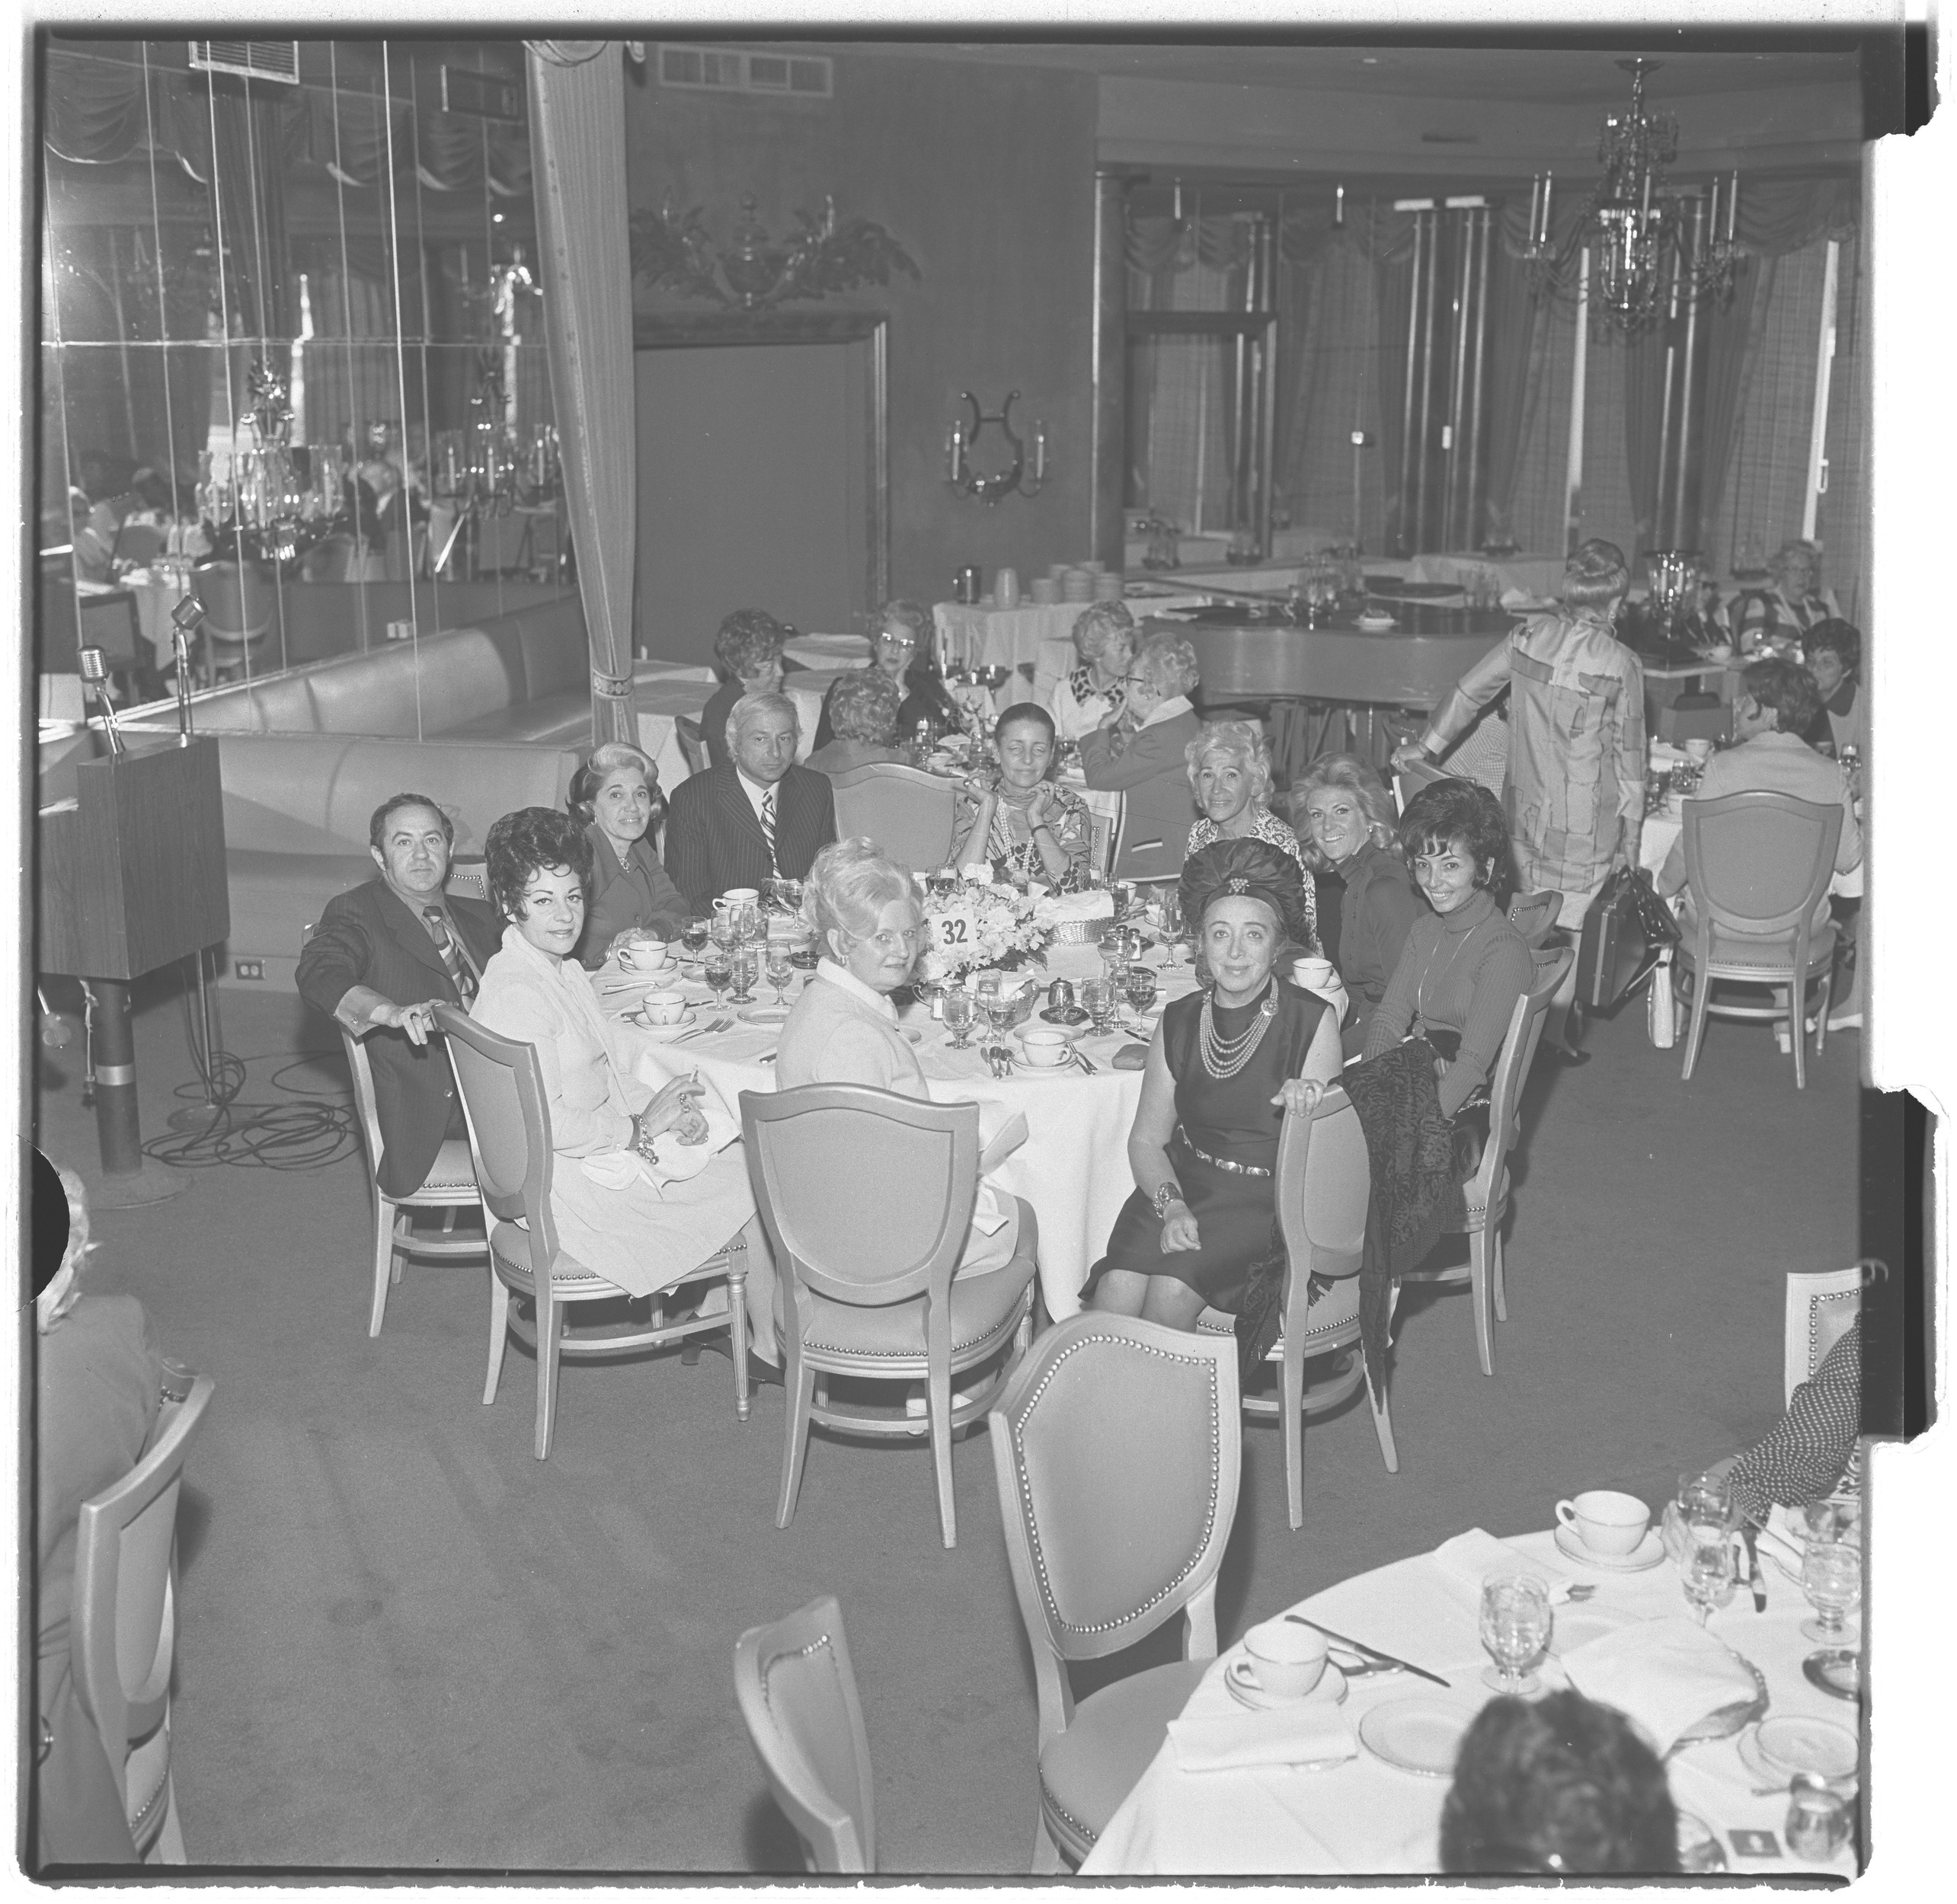 Photographs of Combined Jewish Appeal (Tropicana Hotel Gourmet RM), image 02